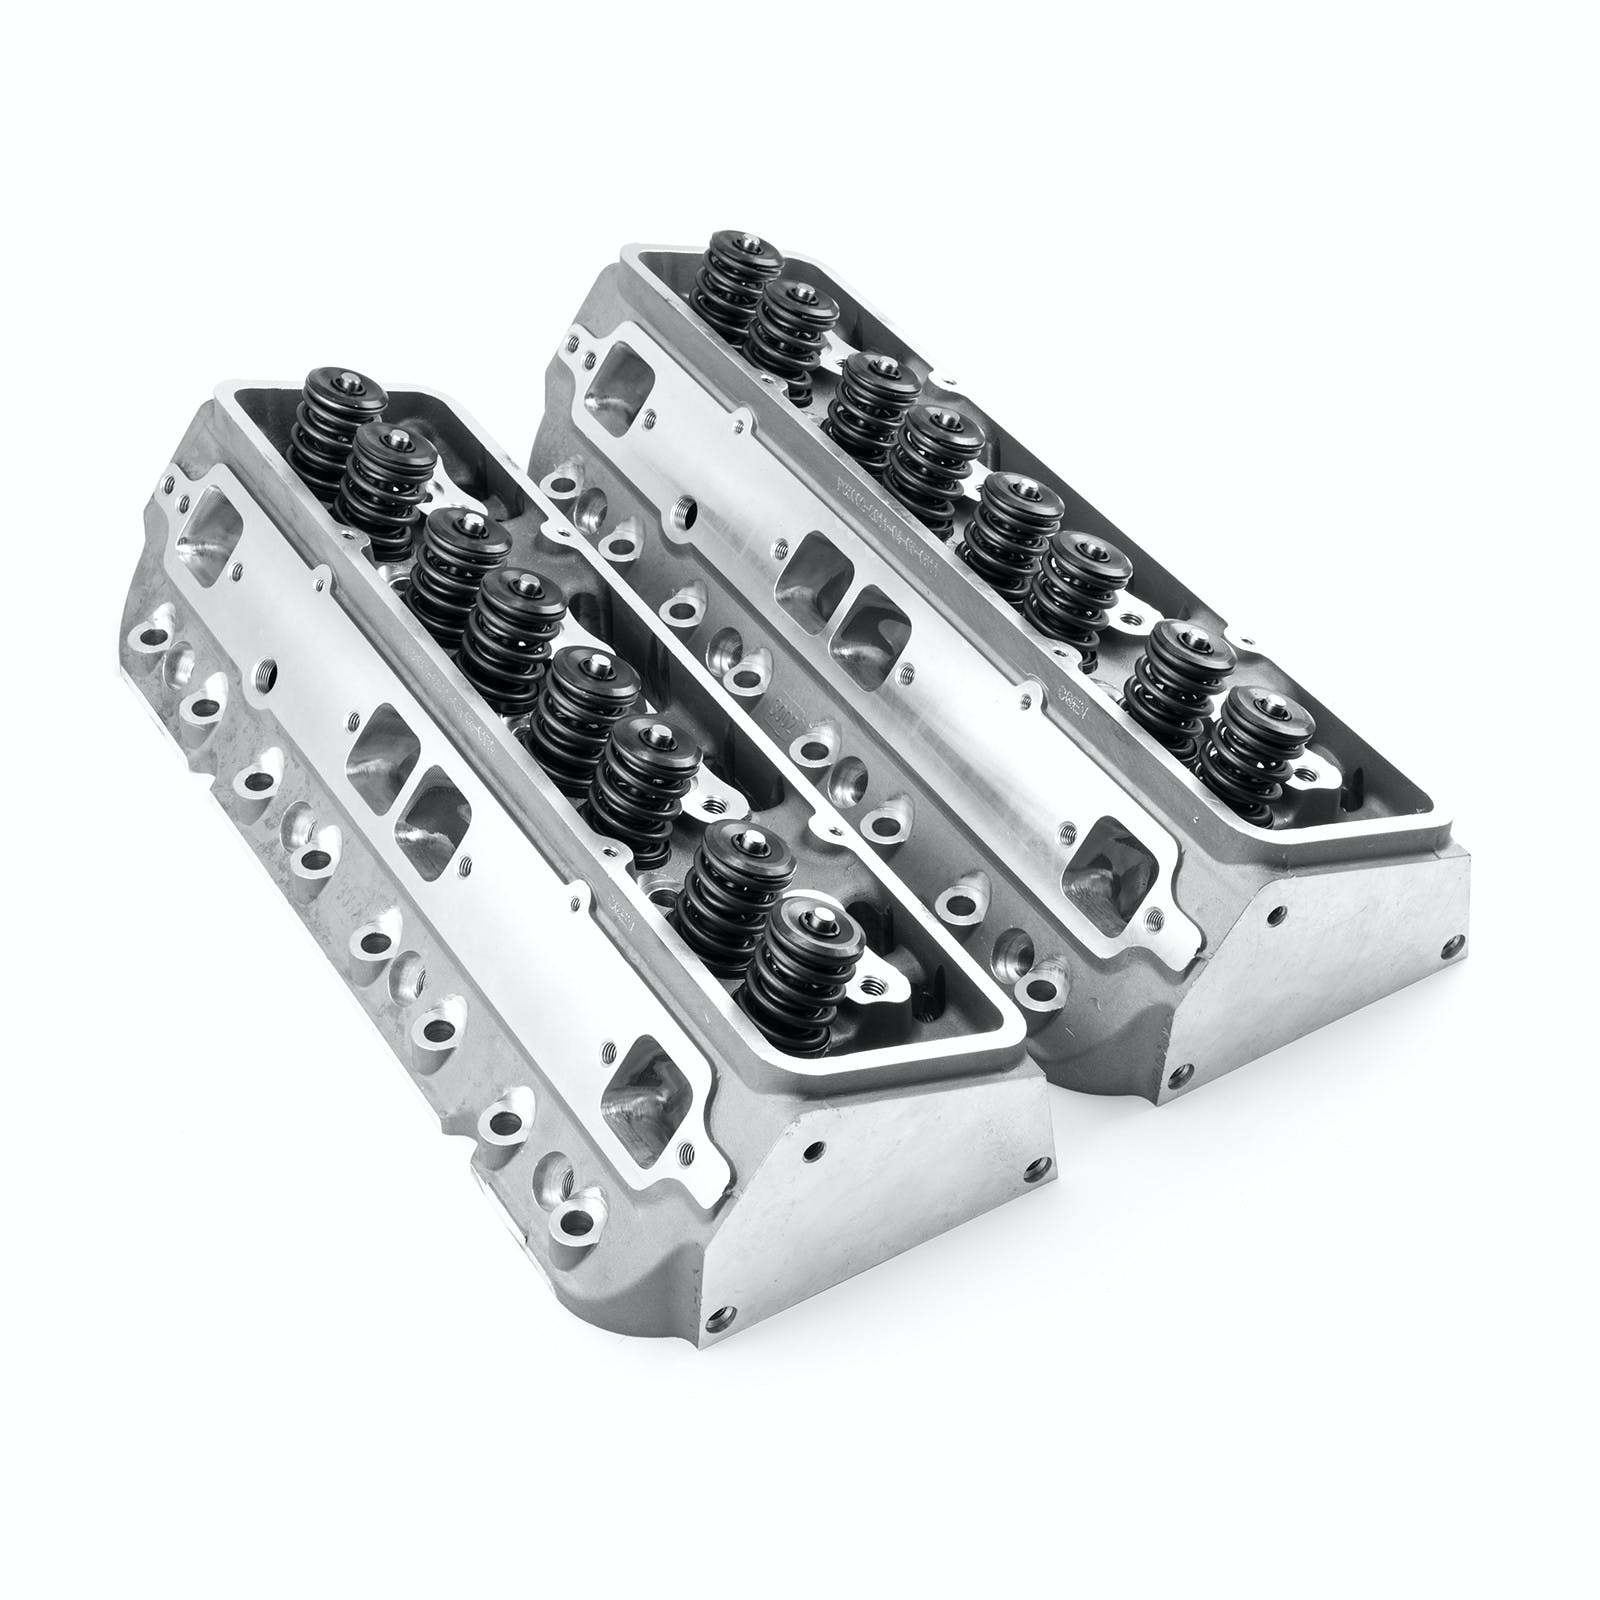 Speedmaster PCE281.2016 217cc 70cc Angle CNC Solid-FT Complete Aluminum Cylinder Heads